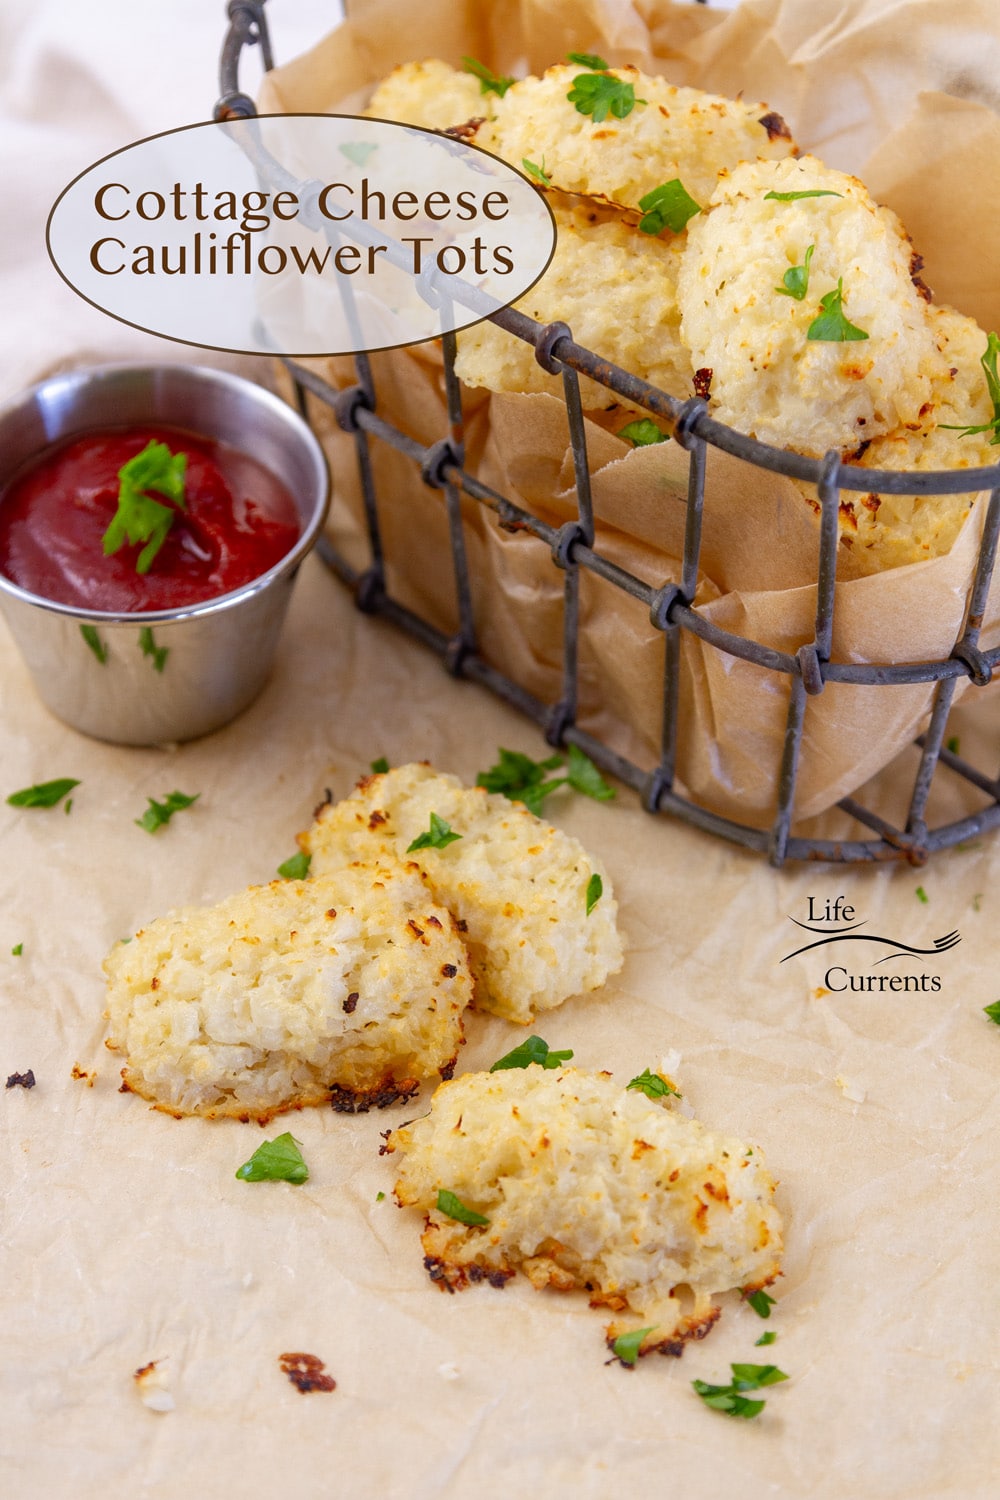 Three Cottage Cheese Cauliflower Tots on a piece of parchment paper next to dipping sauce and a basket of the tots.